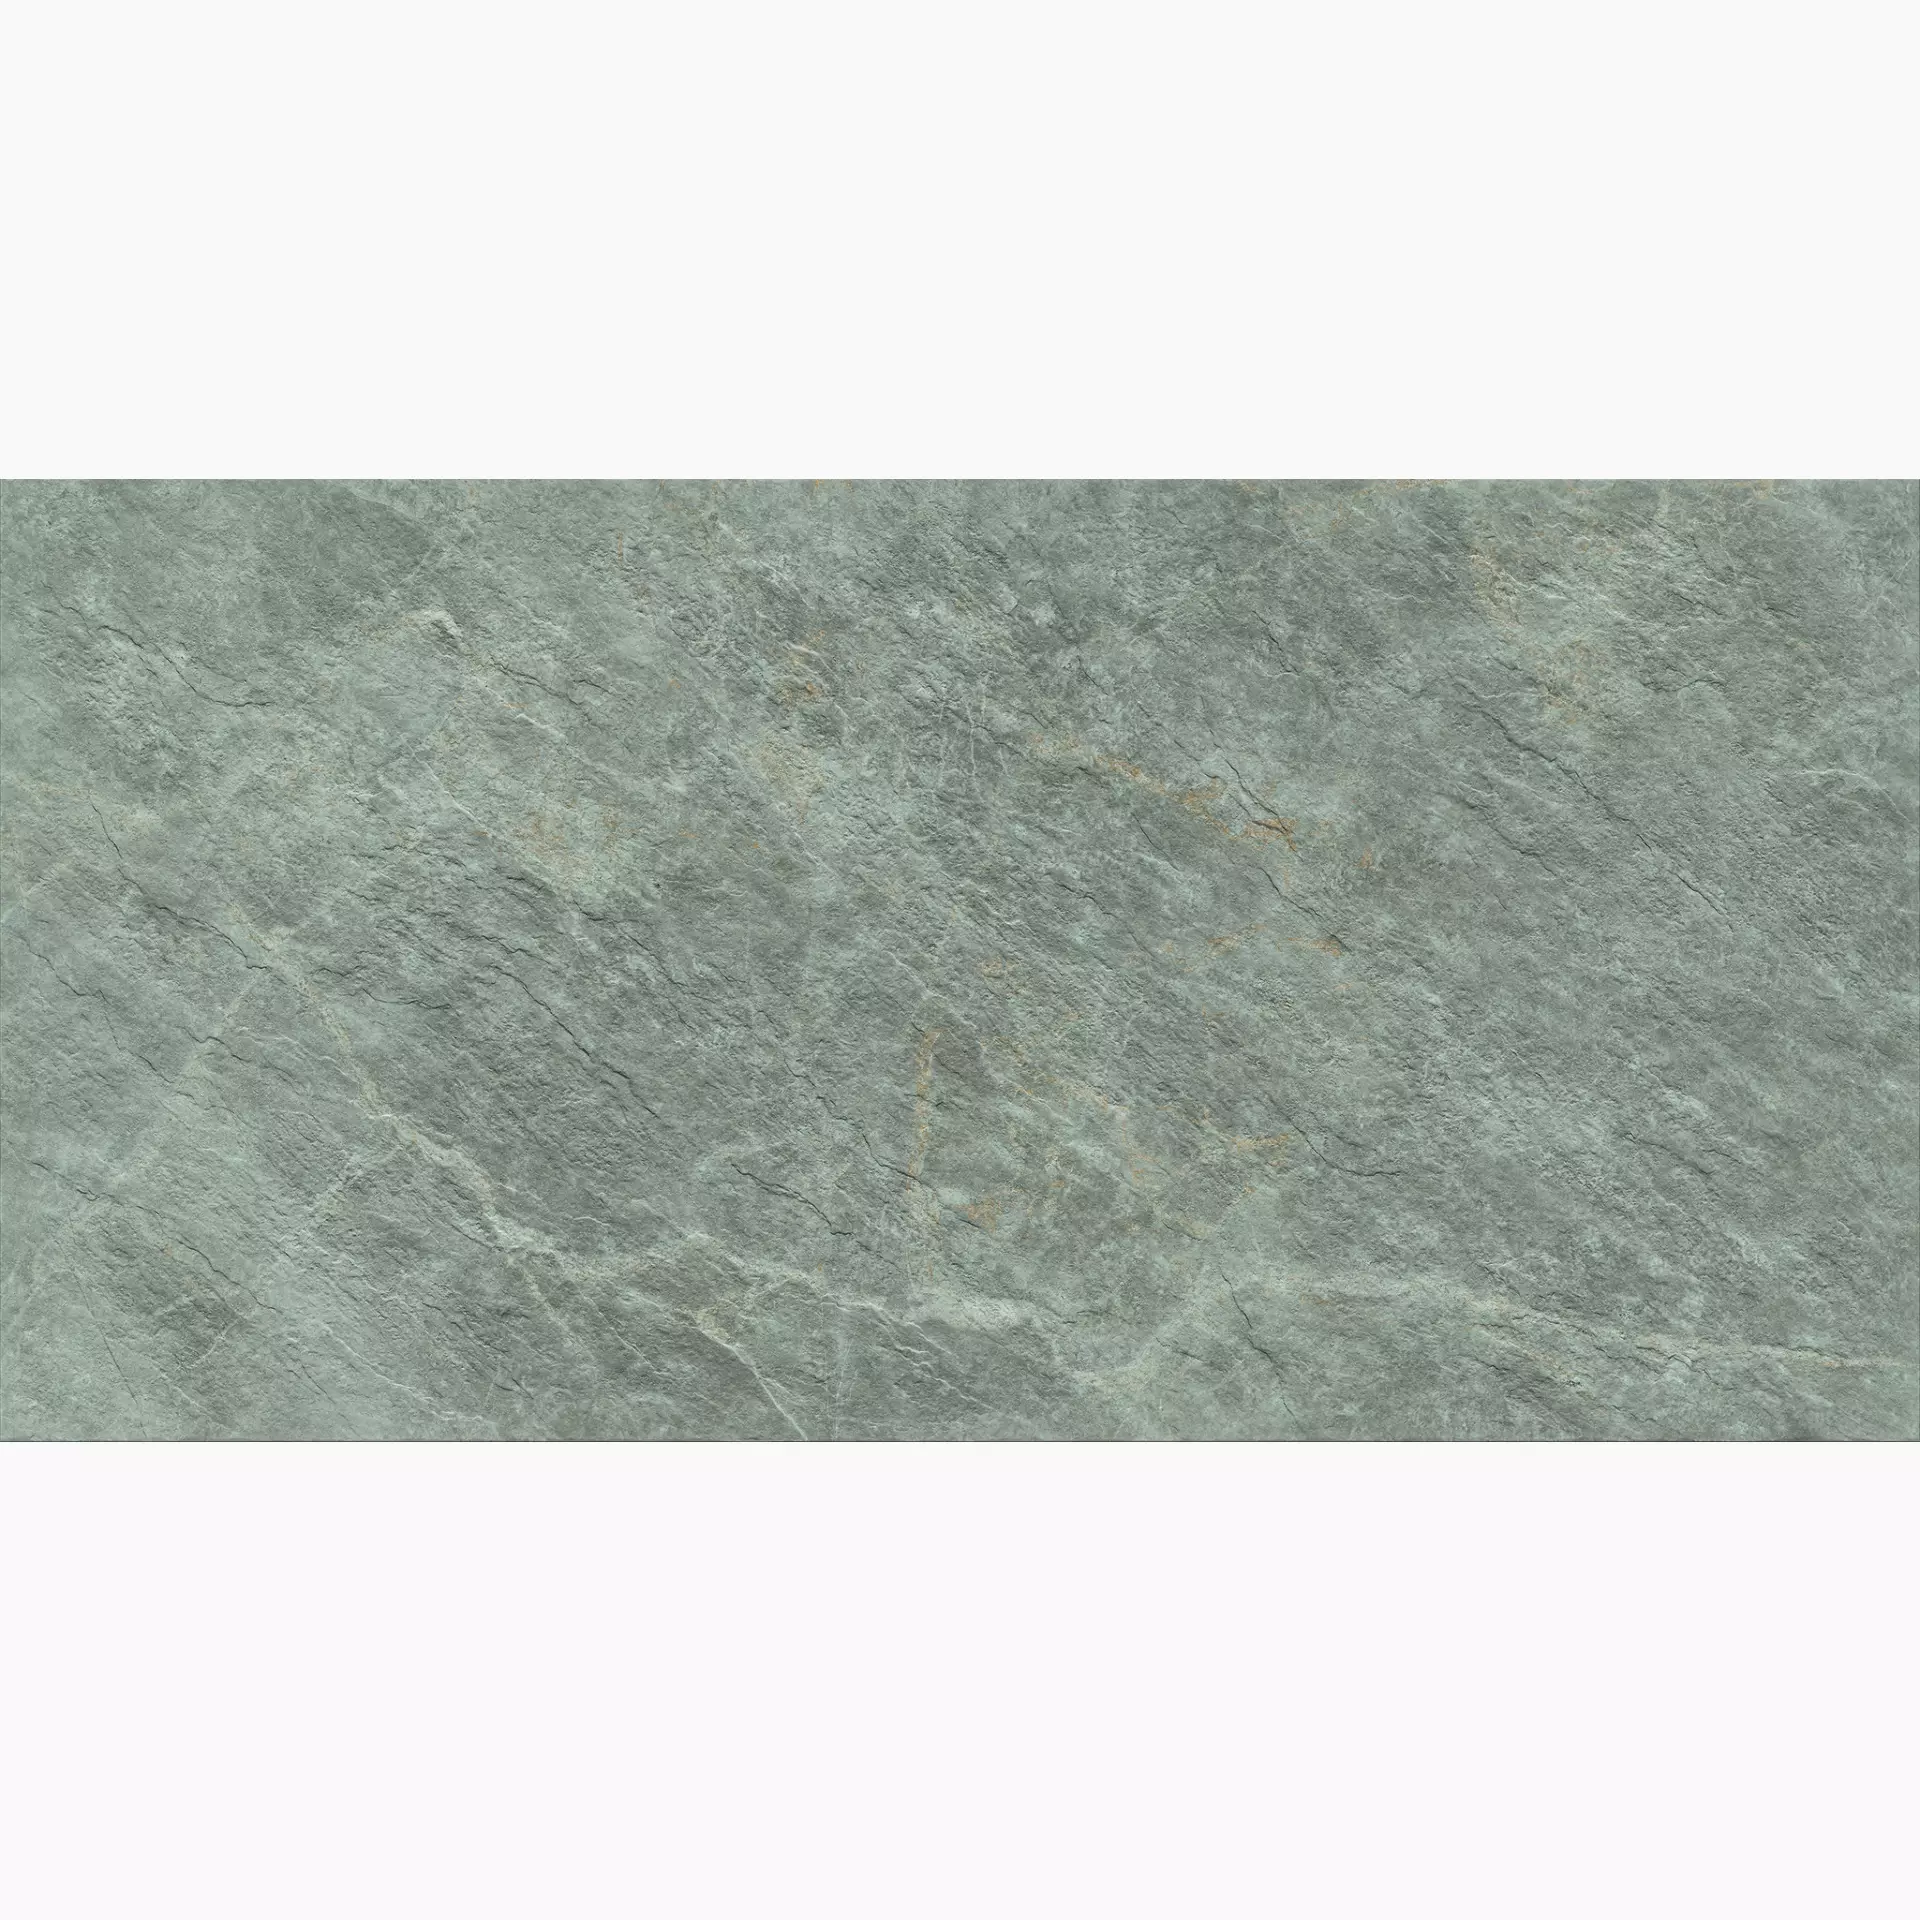 Atlasconcorde Marvel X Fior Di Bosco Hammered – Outdoor AGFB 60x120cm rectified 20mm